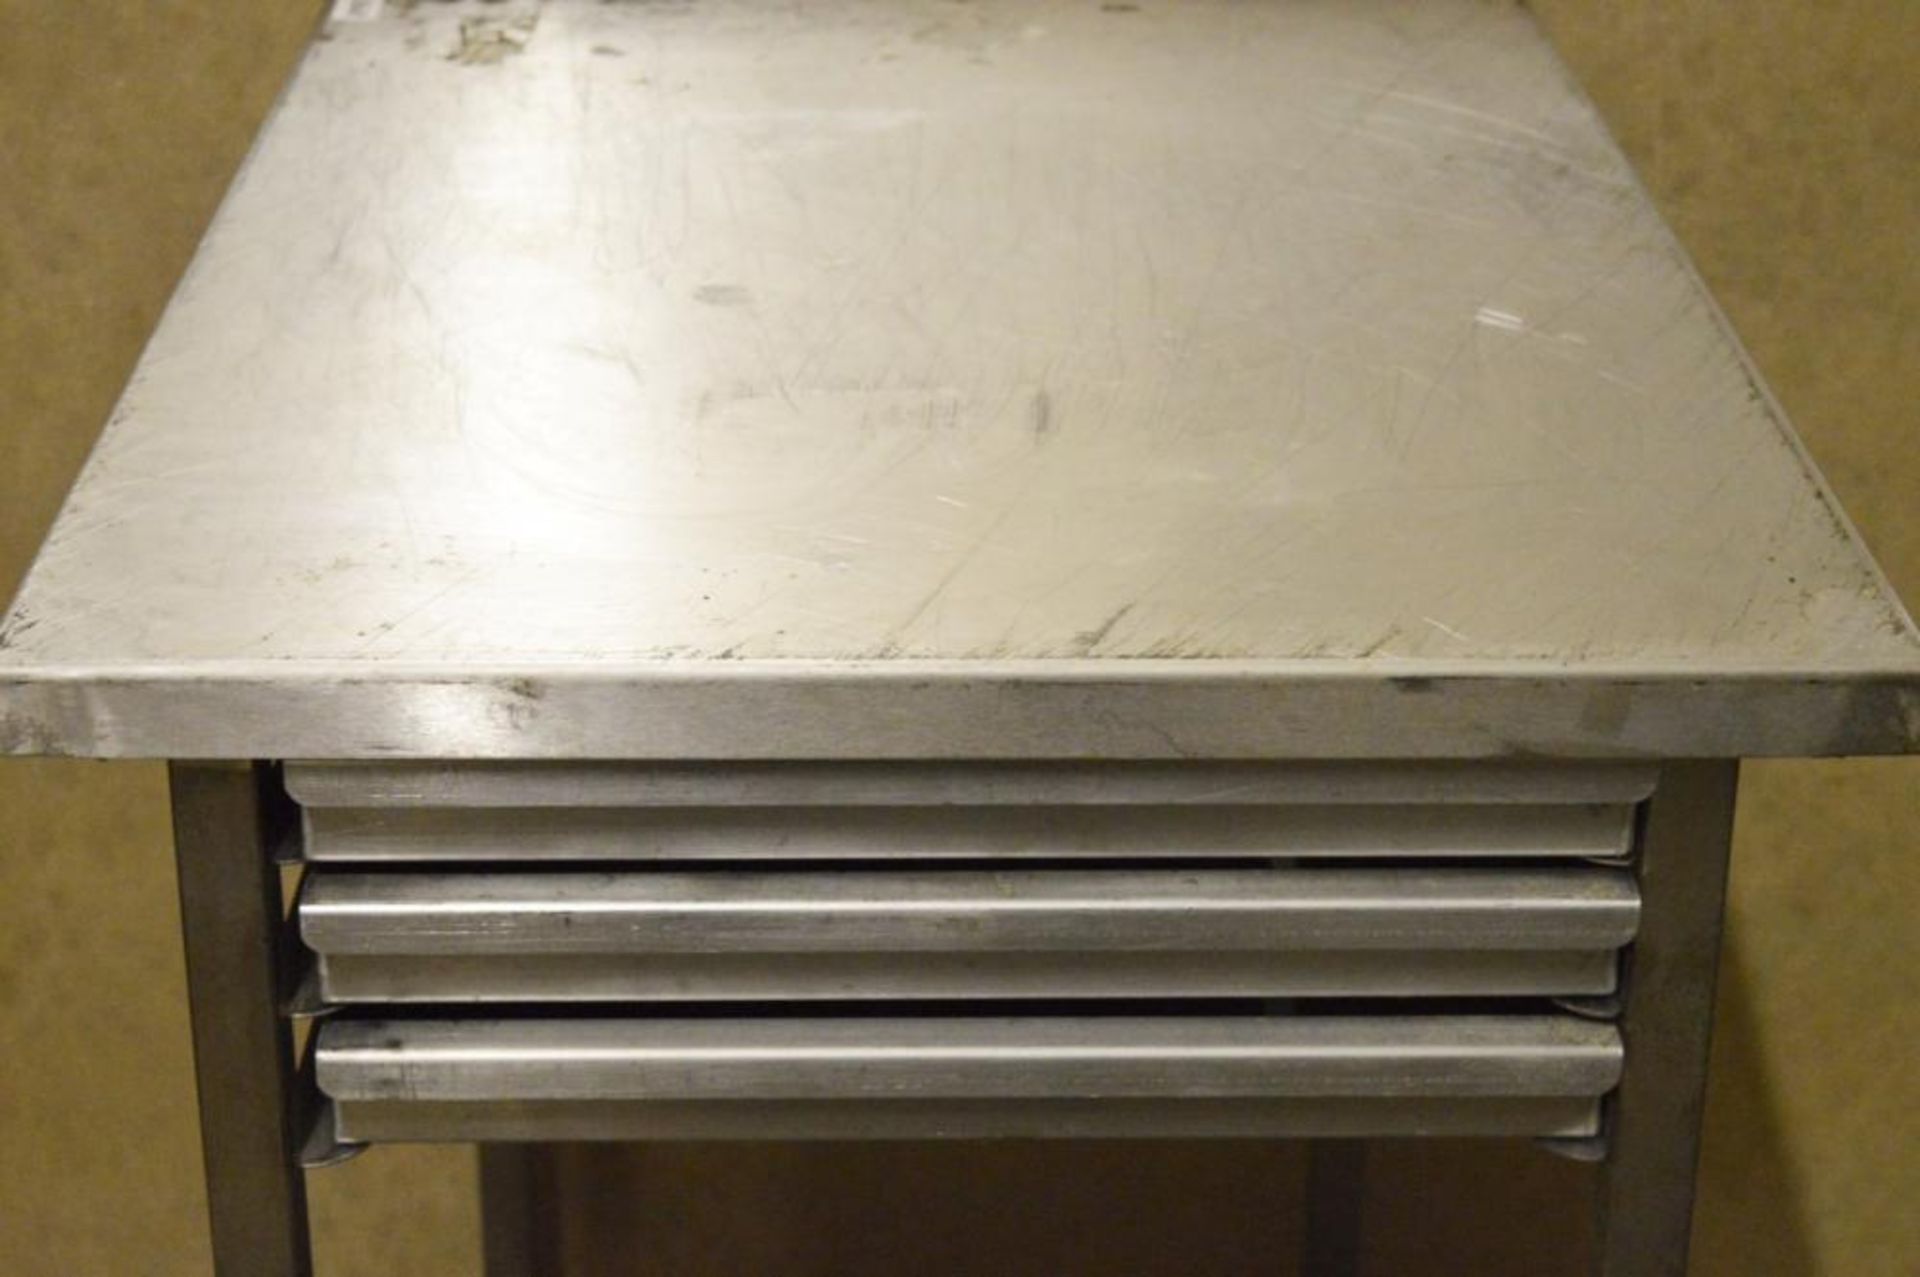 1 x Stainless Steel Bakers Preperation Table With Integrated Drawer System and Three Drawers - H87 x - Image 4 of 5